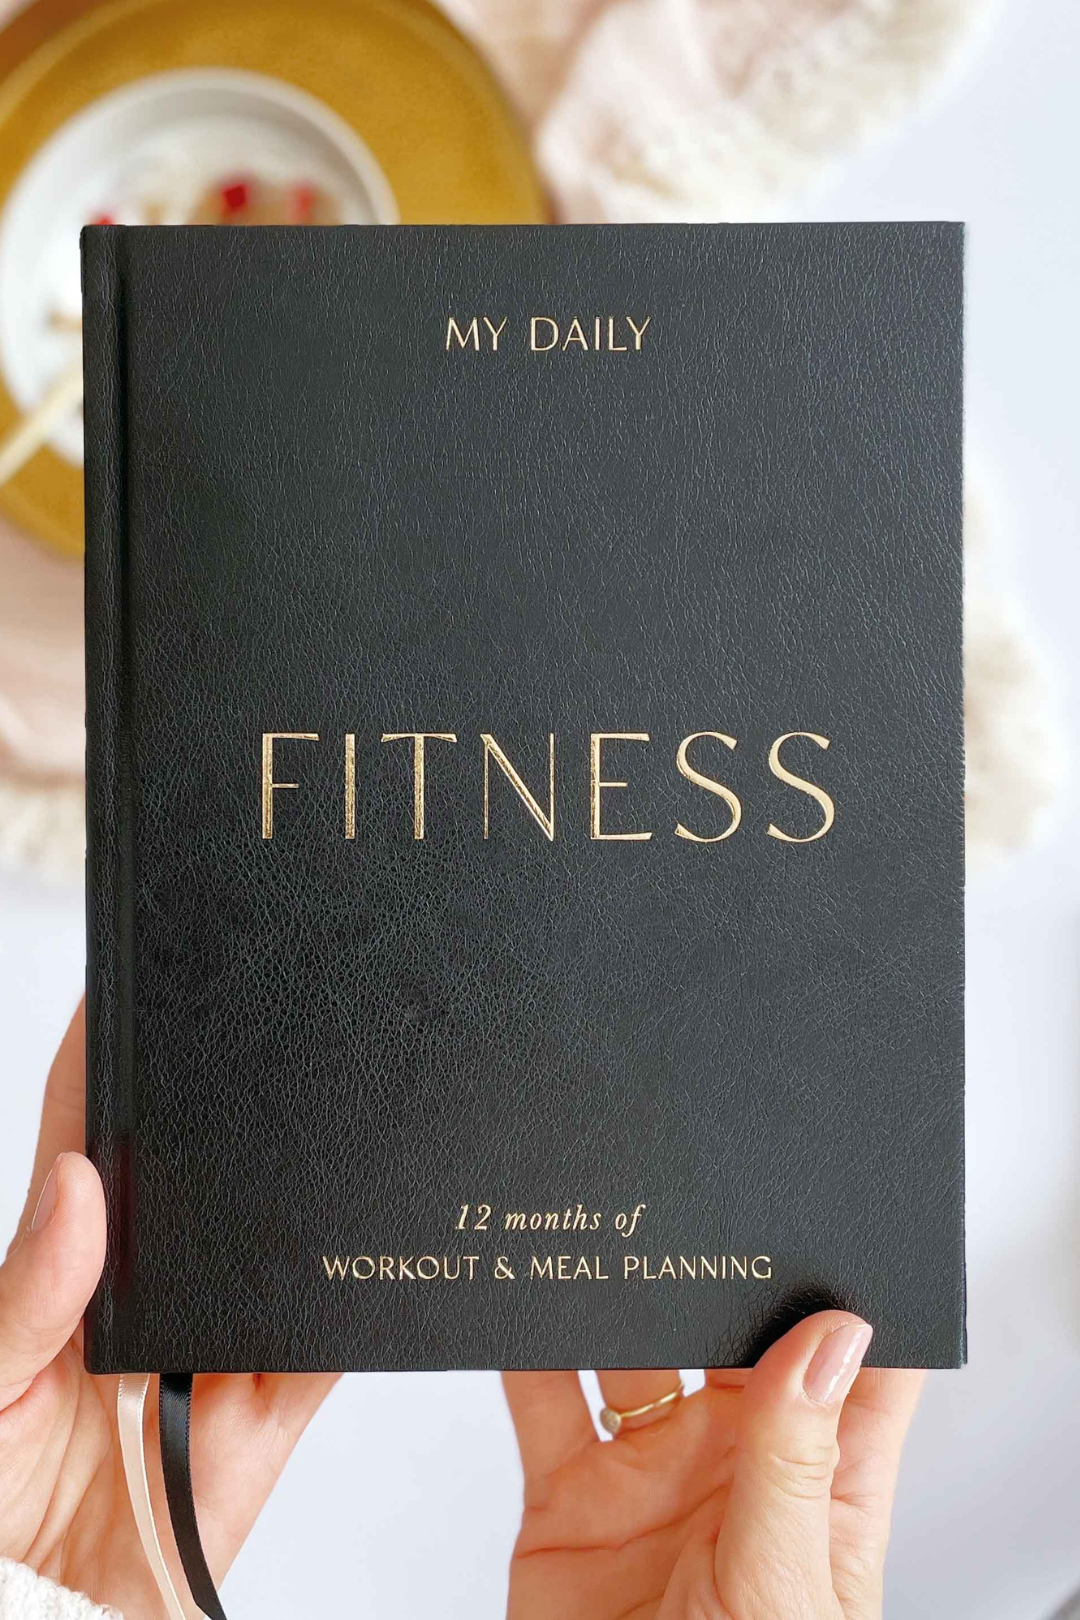 Stay on top of your fitness goals with this comprehensive planner. Track your workouts, plan your meals, and monitor your progress all in one convenient place. This Planner is from Blush and Gold and sold at Blackbird Designs.